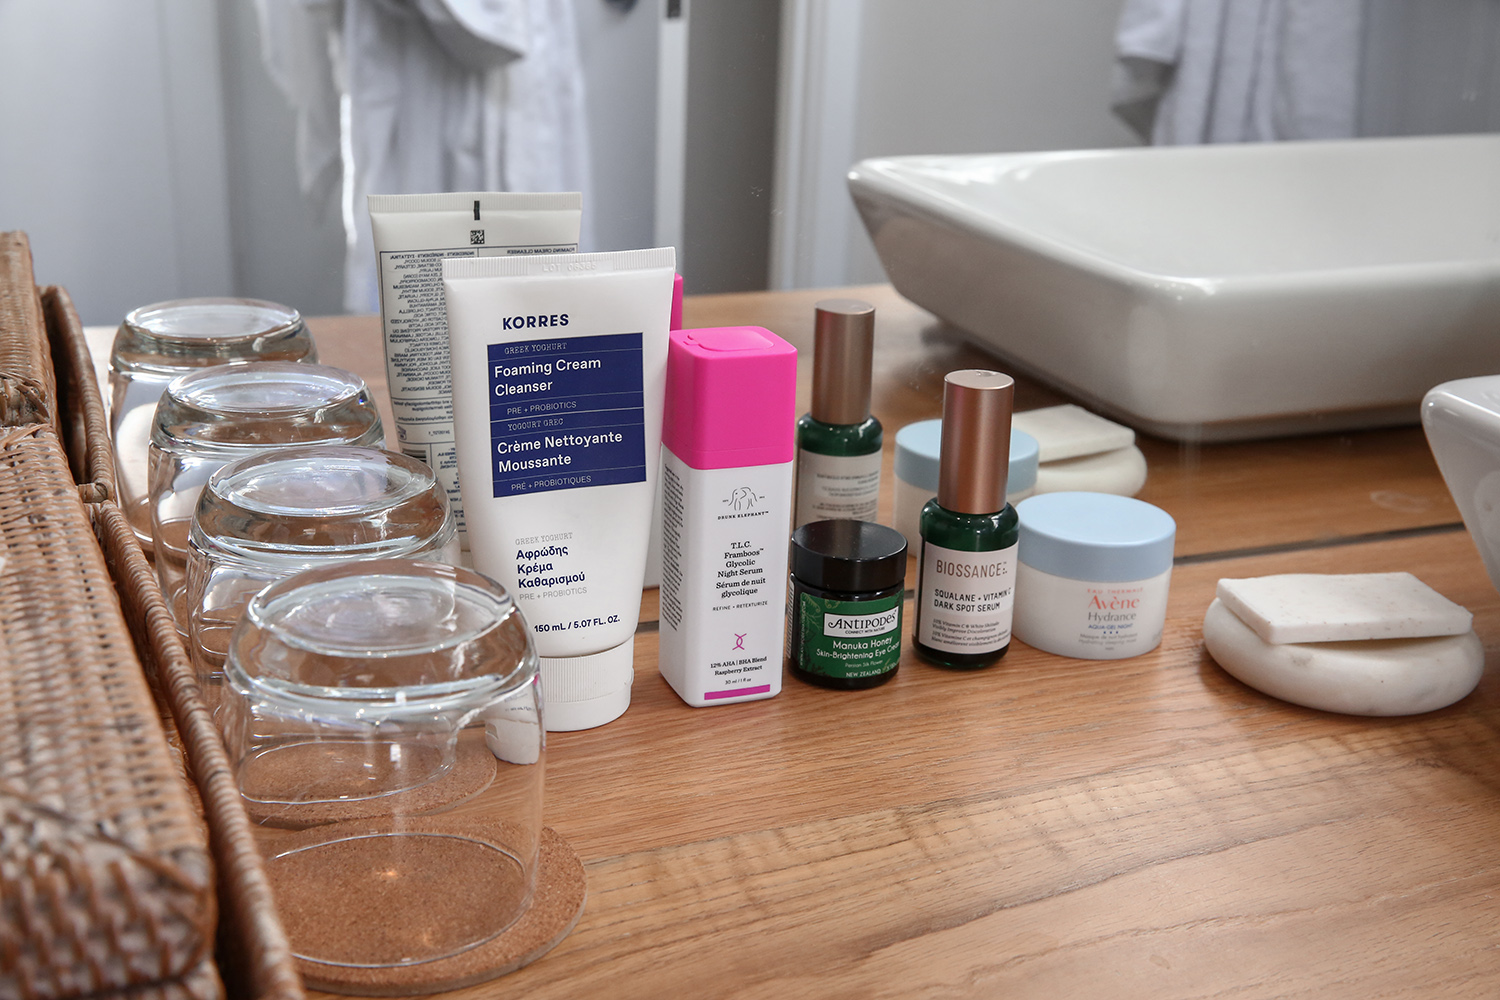 My fuss-free skincare and makeup routine